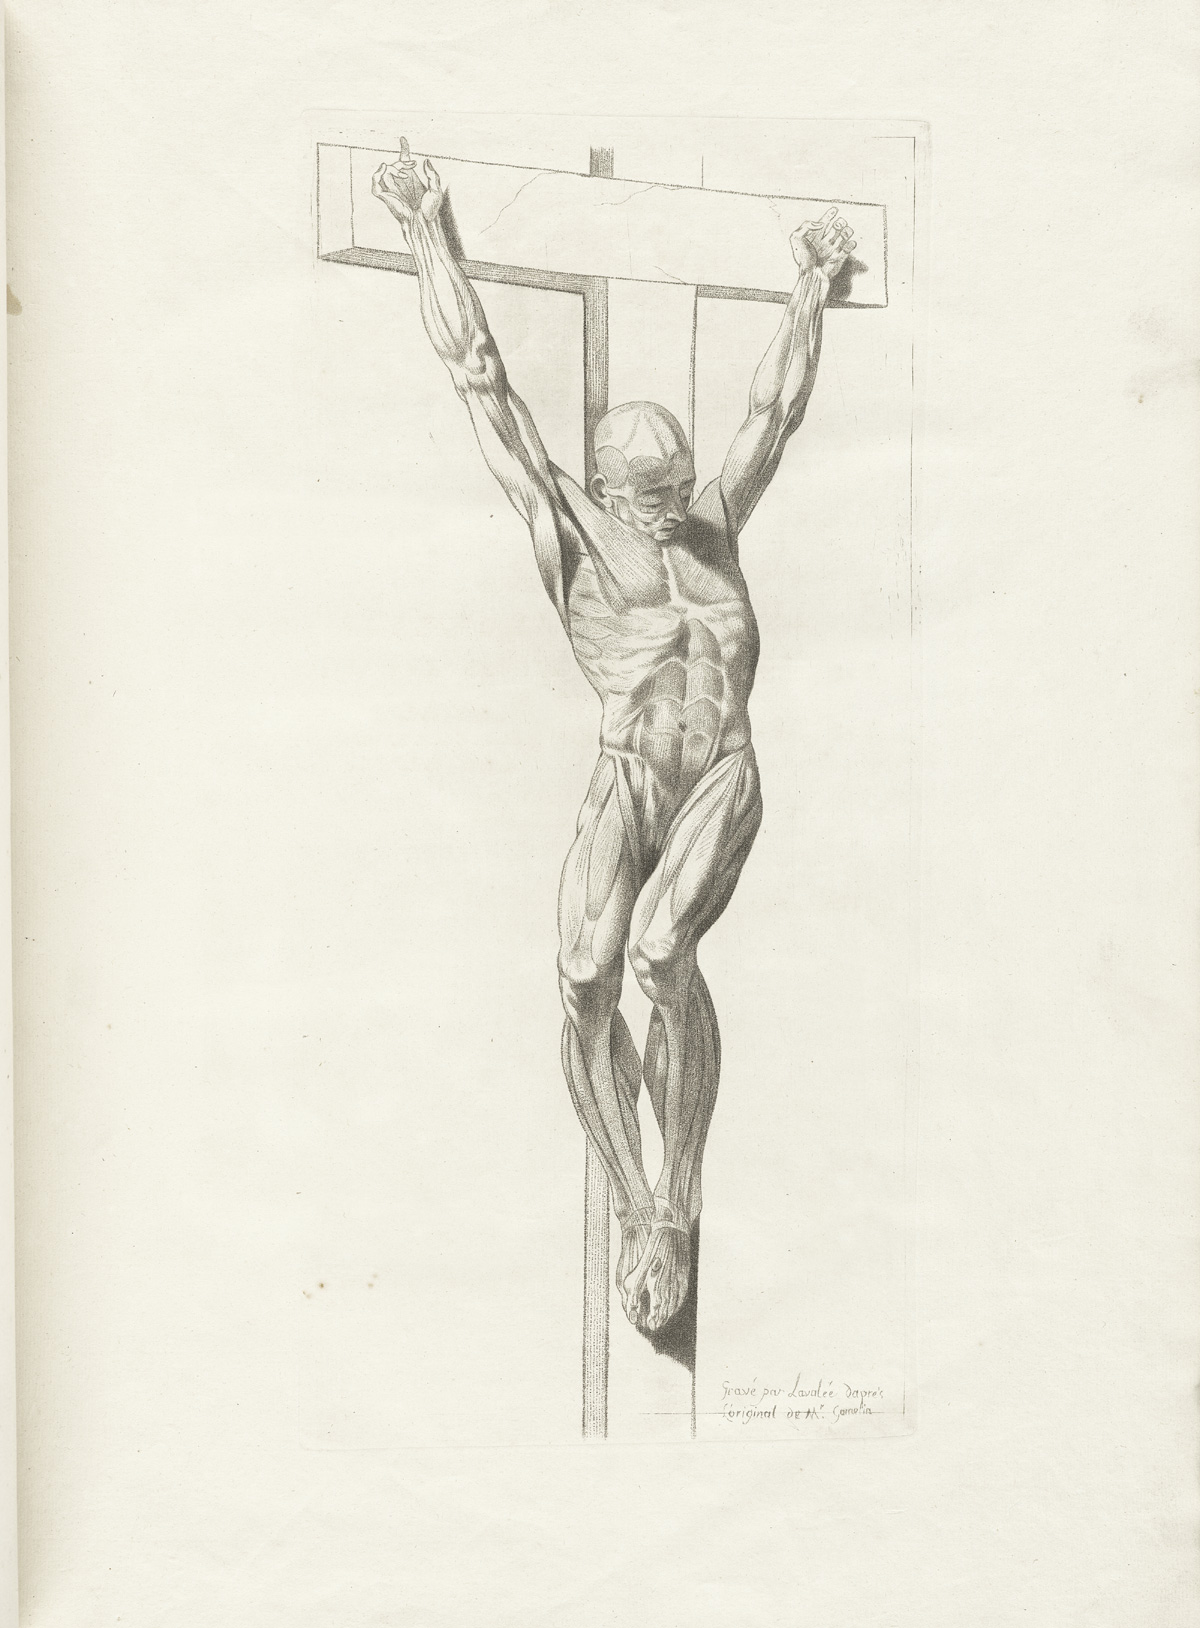 Engraving of a facing nude male muscle figure nailed to a crucifix with skin removed in order to show detailed views of the muscles of the chest, abdomen, arms and legs; from Jacques Gamelin’s Nouveau recueil d’osteologie et de myologie, NLM Call no.: WZ 260 G178m 1779.